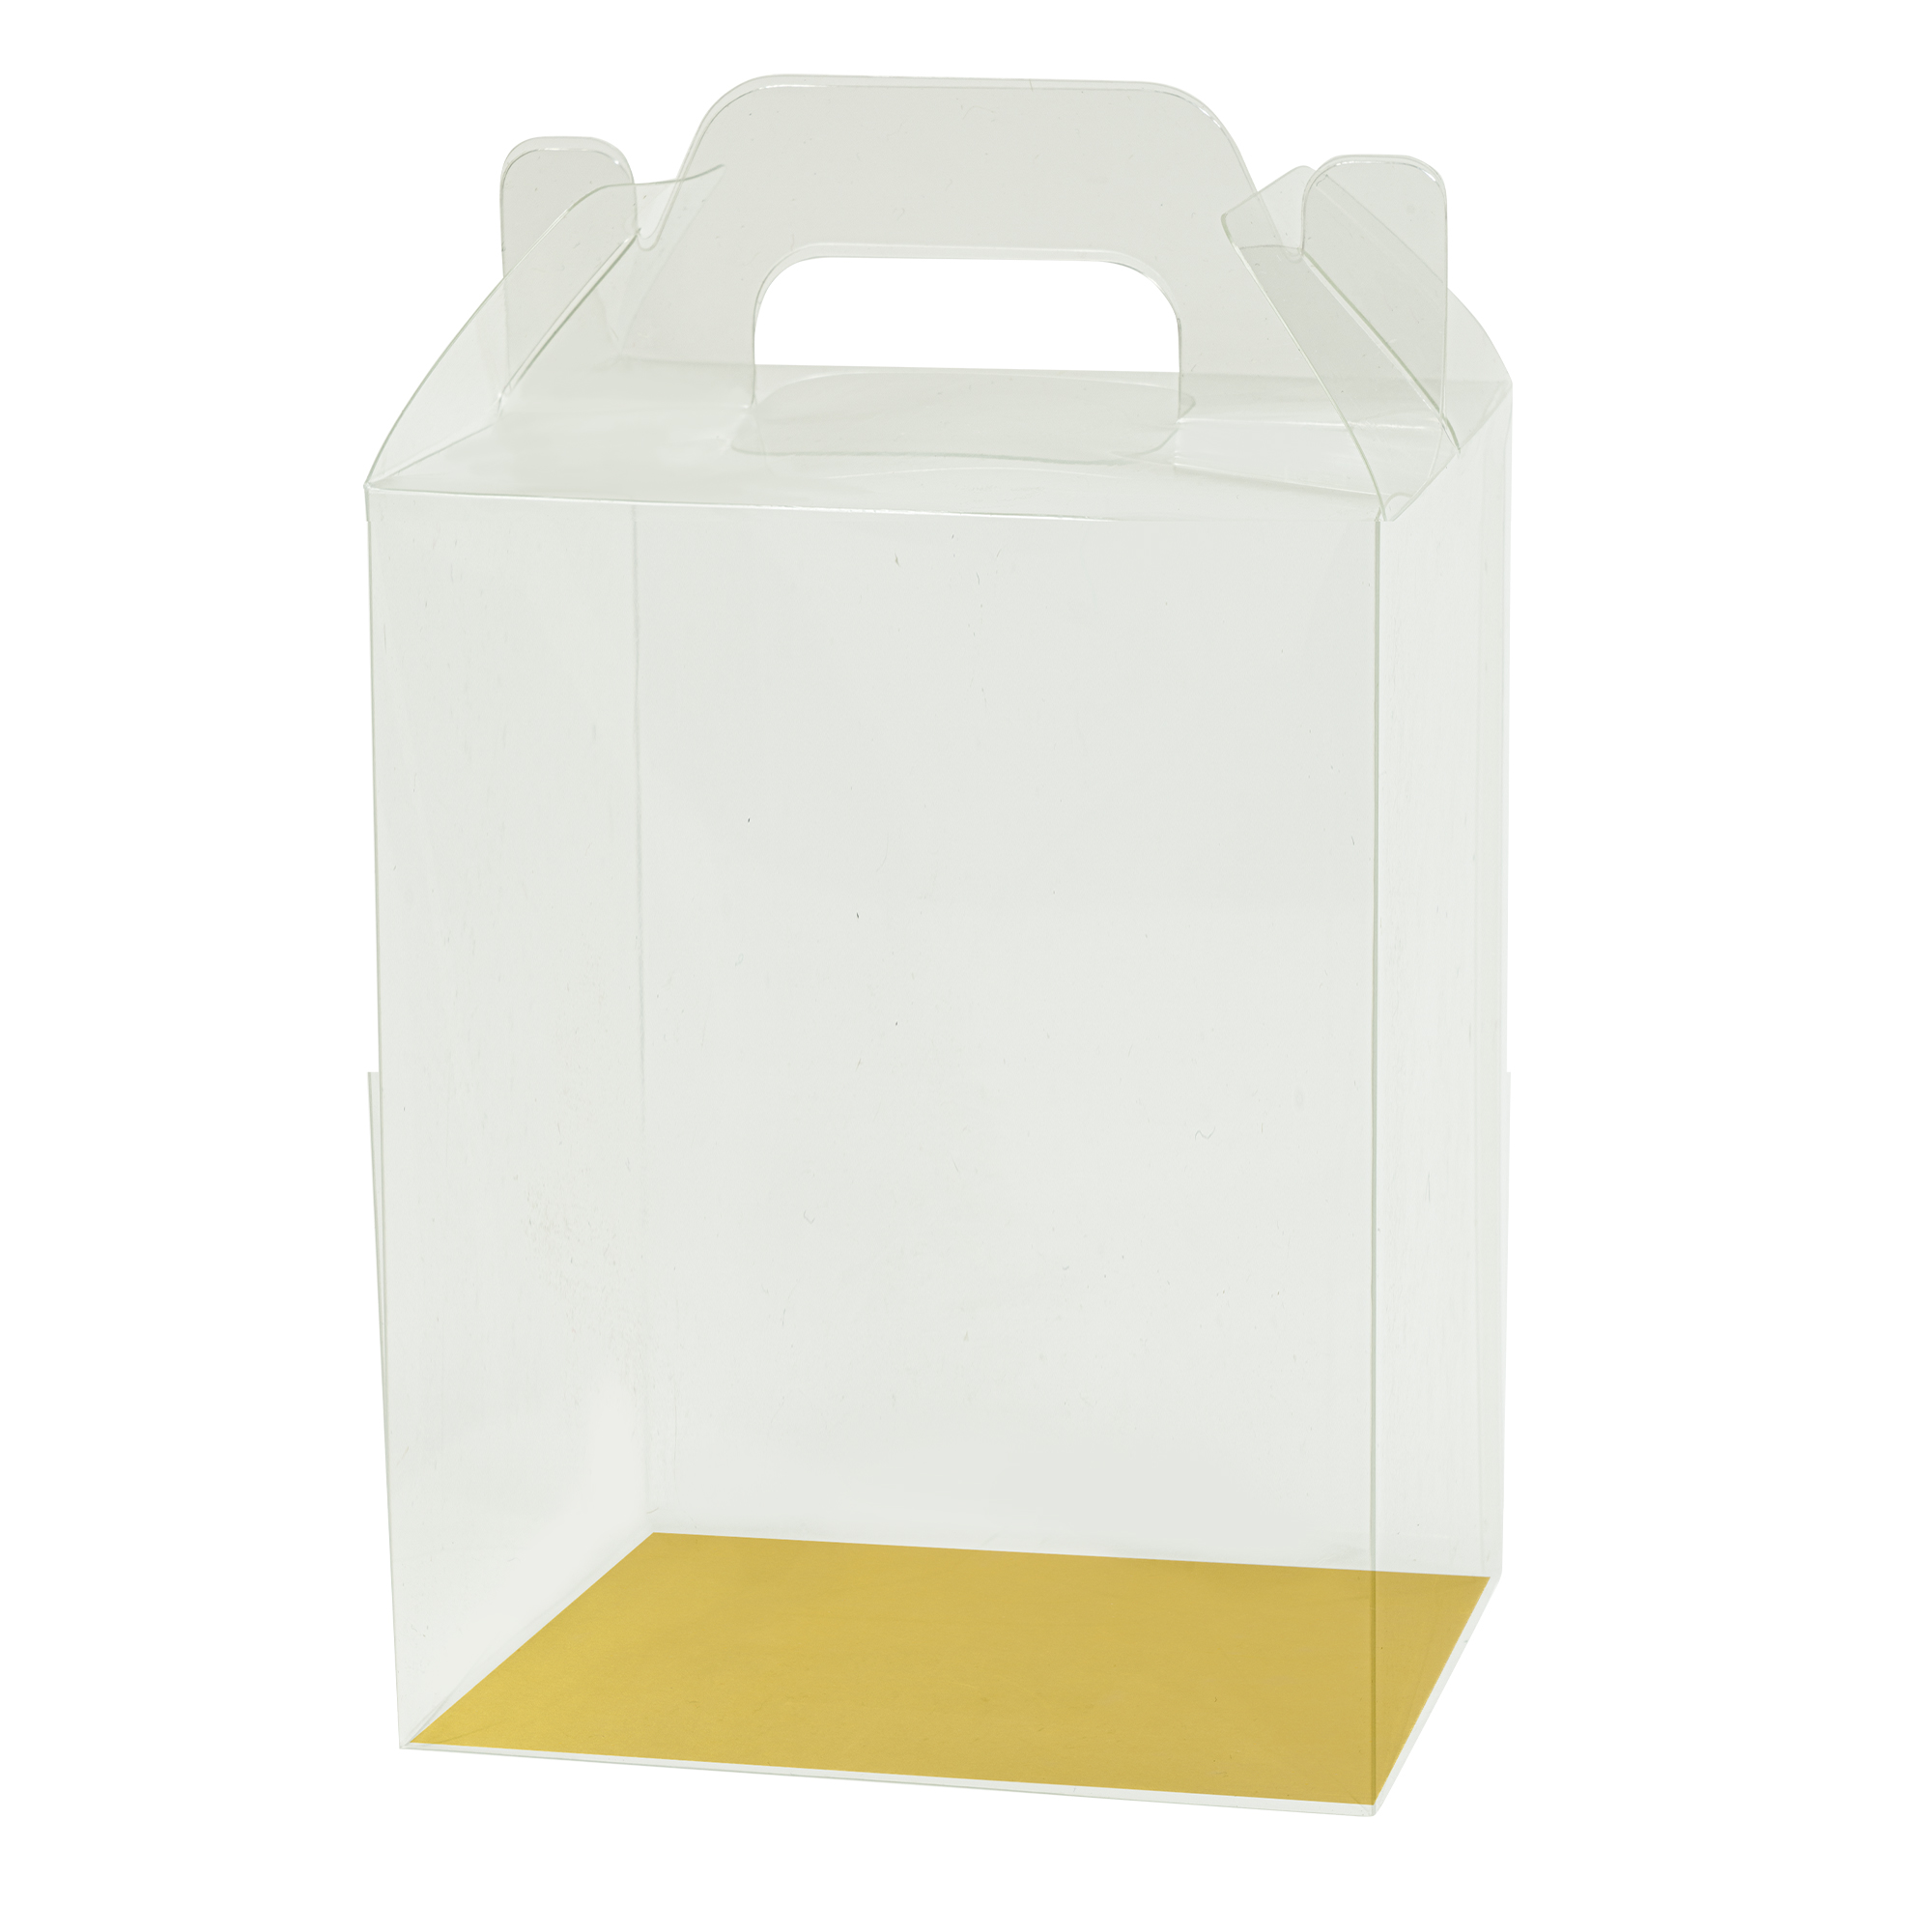 PVC Gift Box With Gold, Silver and White Paper Insert 6pc/pack